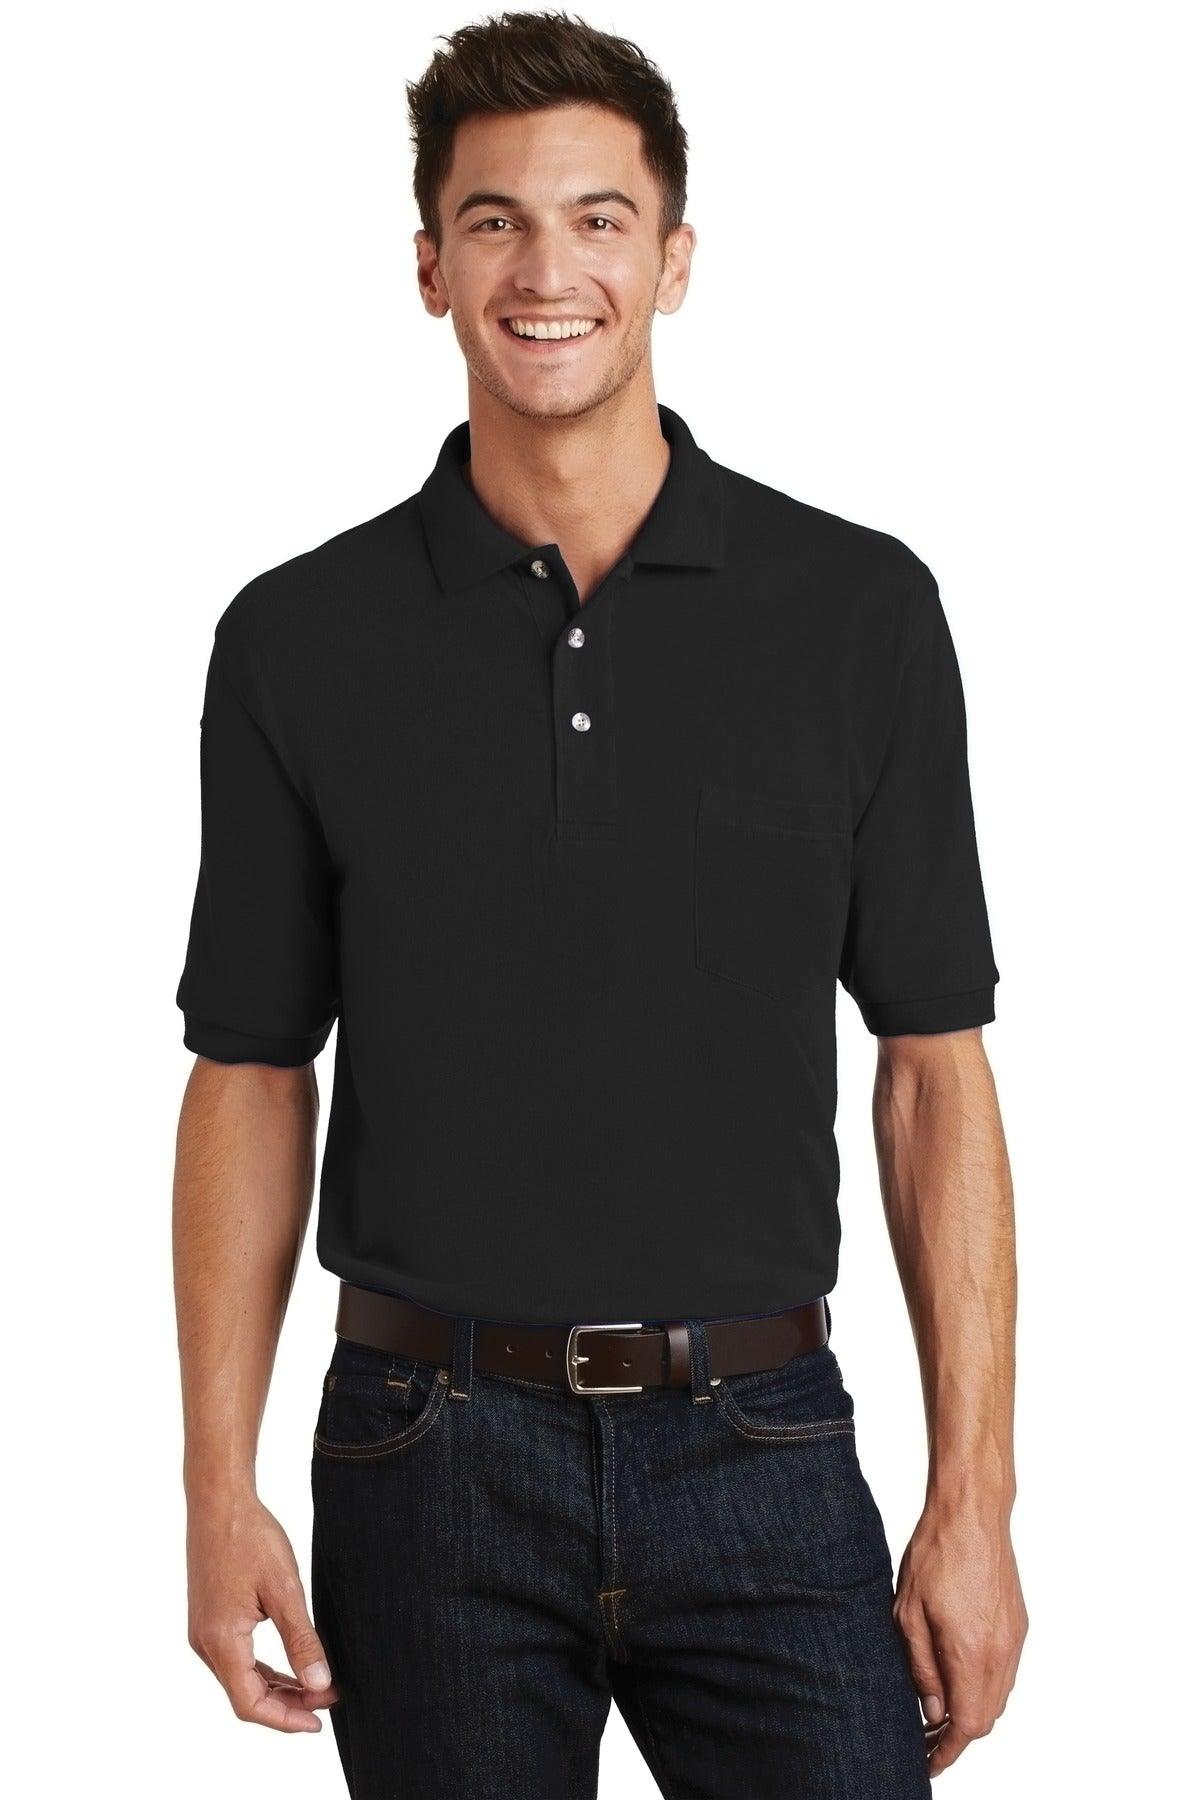 Port Authority Heavyweight Cotton Pique Polo with Pocket. K420P - Dresses Max